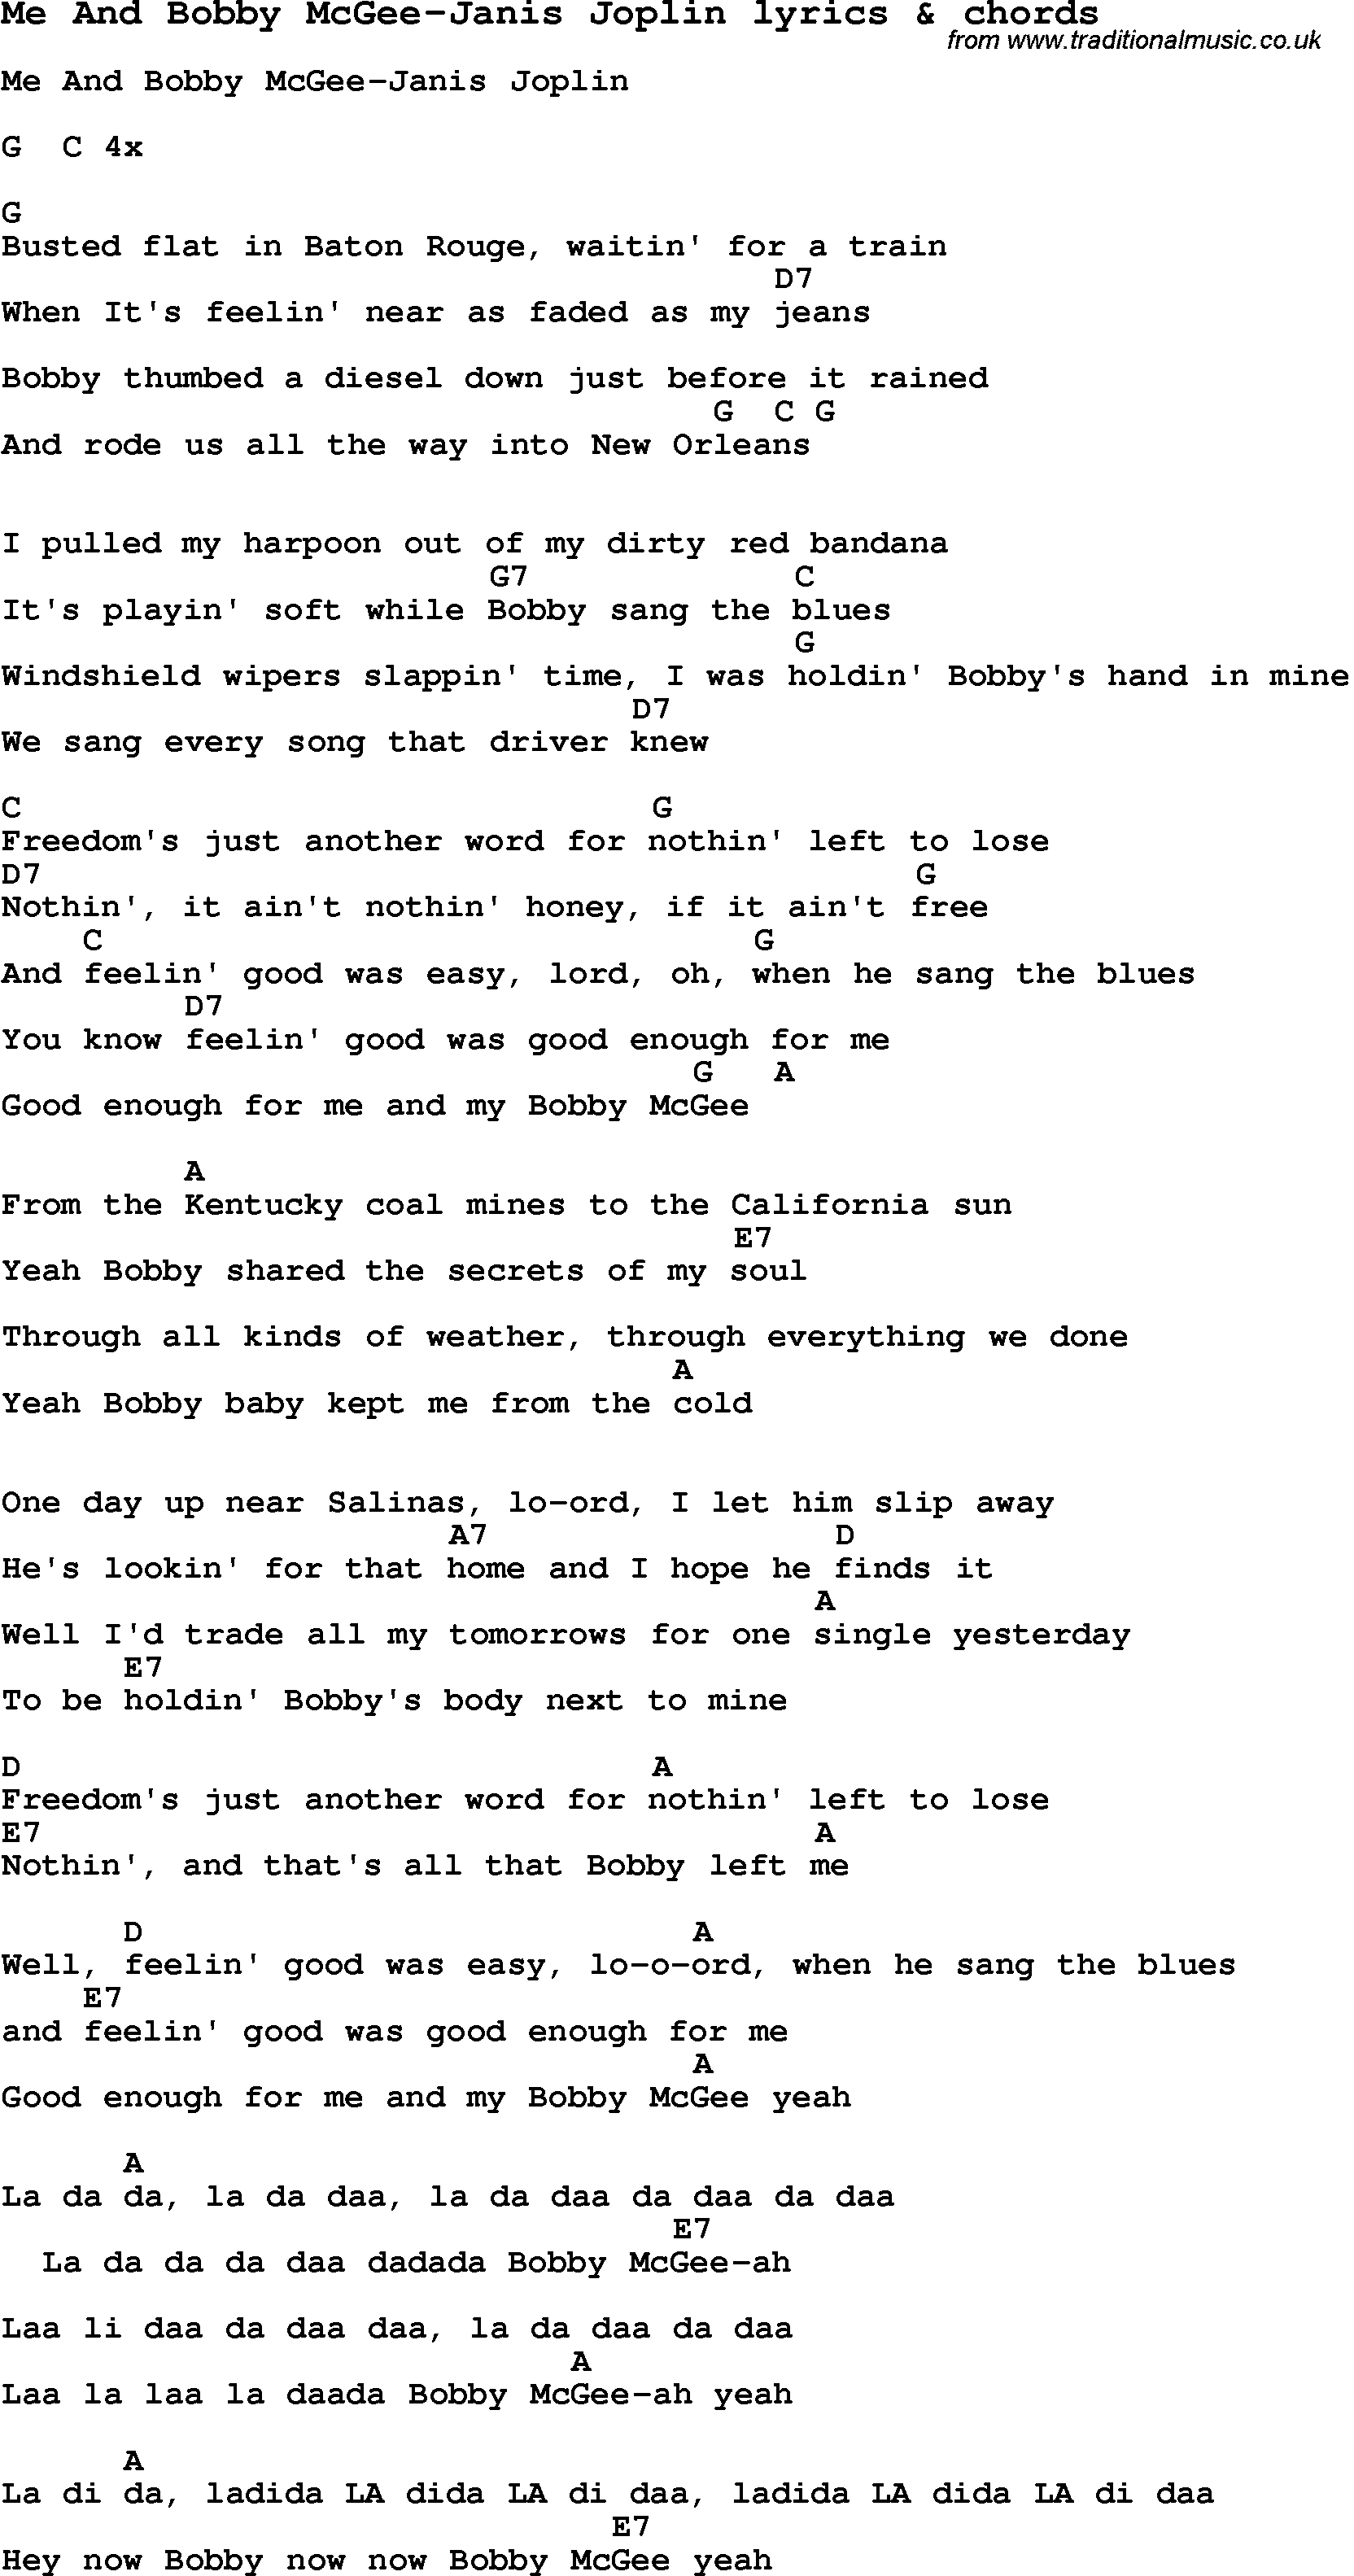 Me And Bobby Mcgee Chords Love Song Lyrics Forme And Bob Mcgee Janis Joplin With Chords